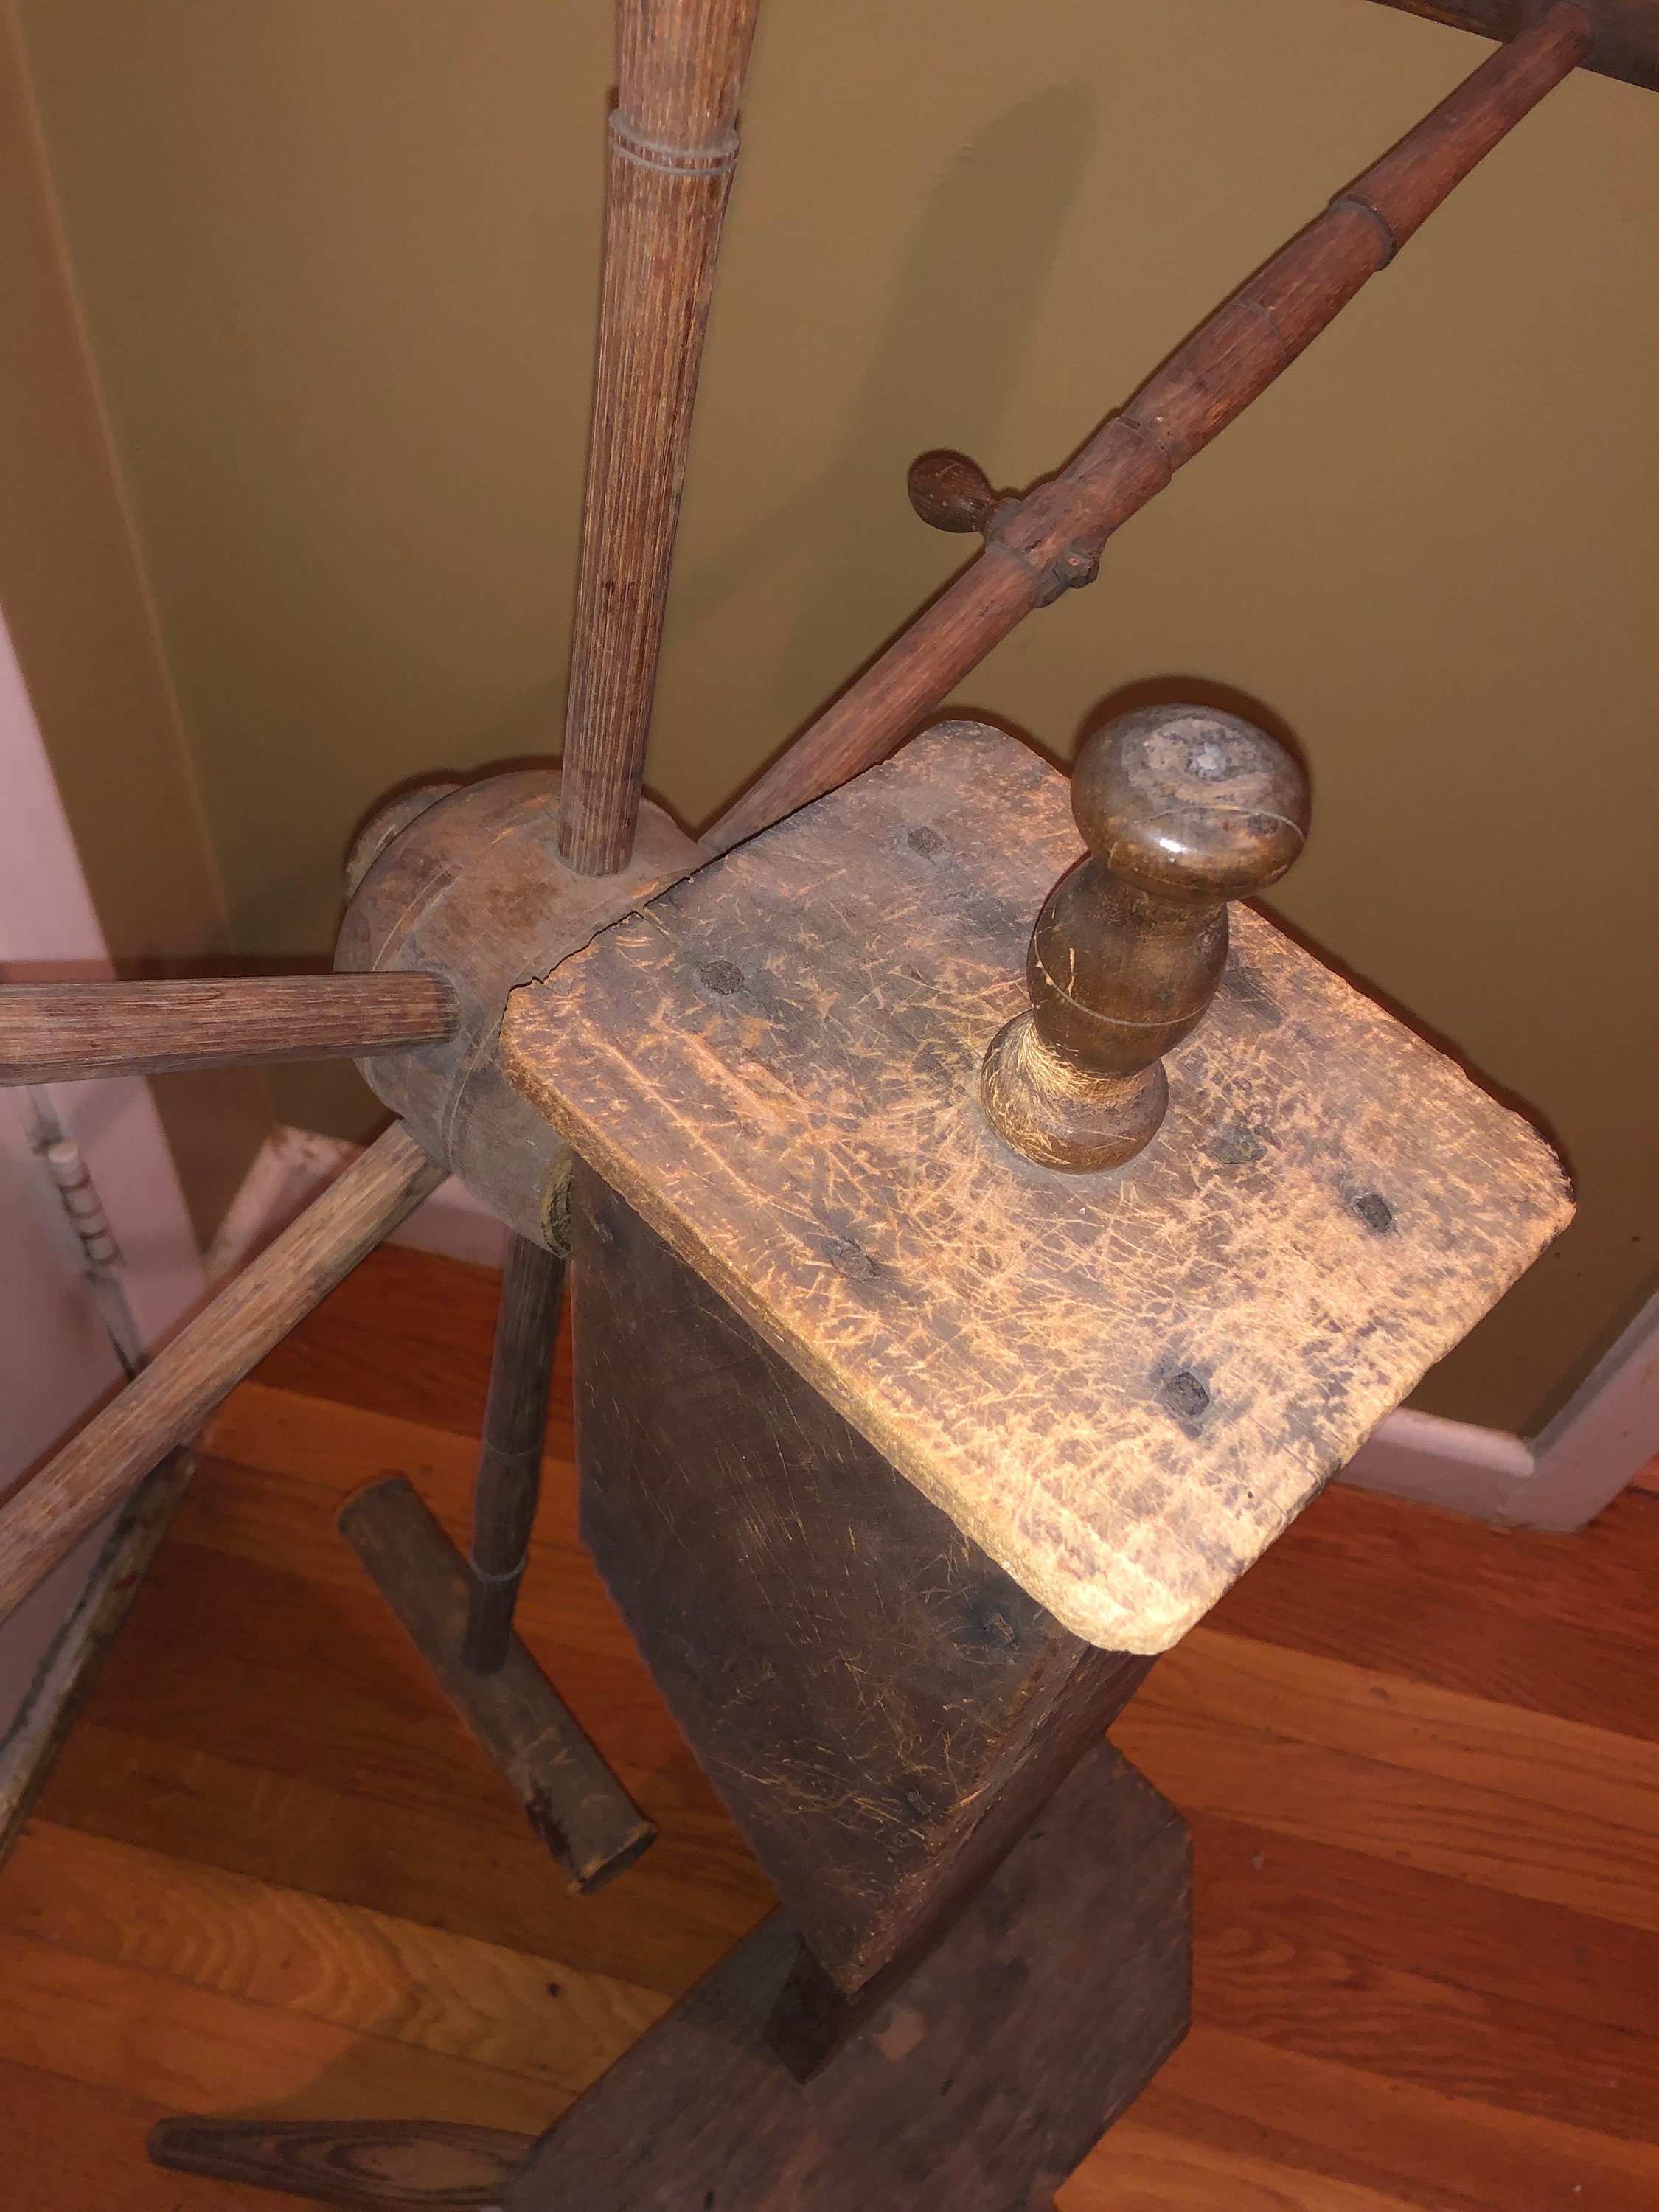 1834 Primitive Antique Spinning Wheel/yarn Winder, Wooden Tool, Handcrafted  Scandinavian Rustic Folk Art, Museum Quality Collectible 